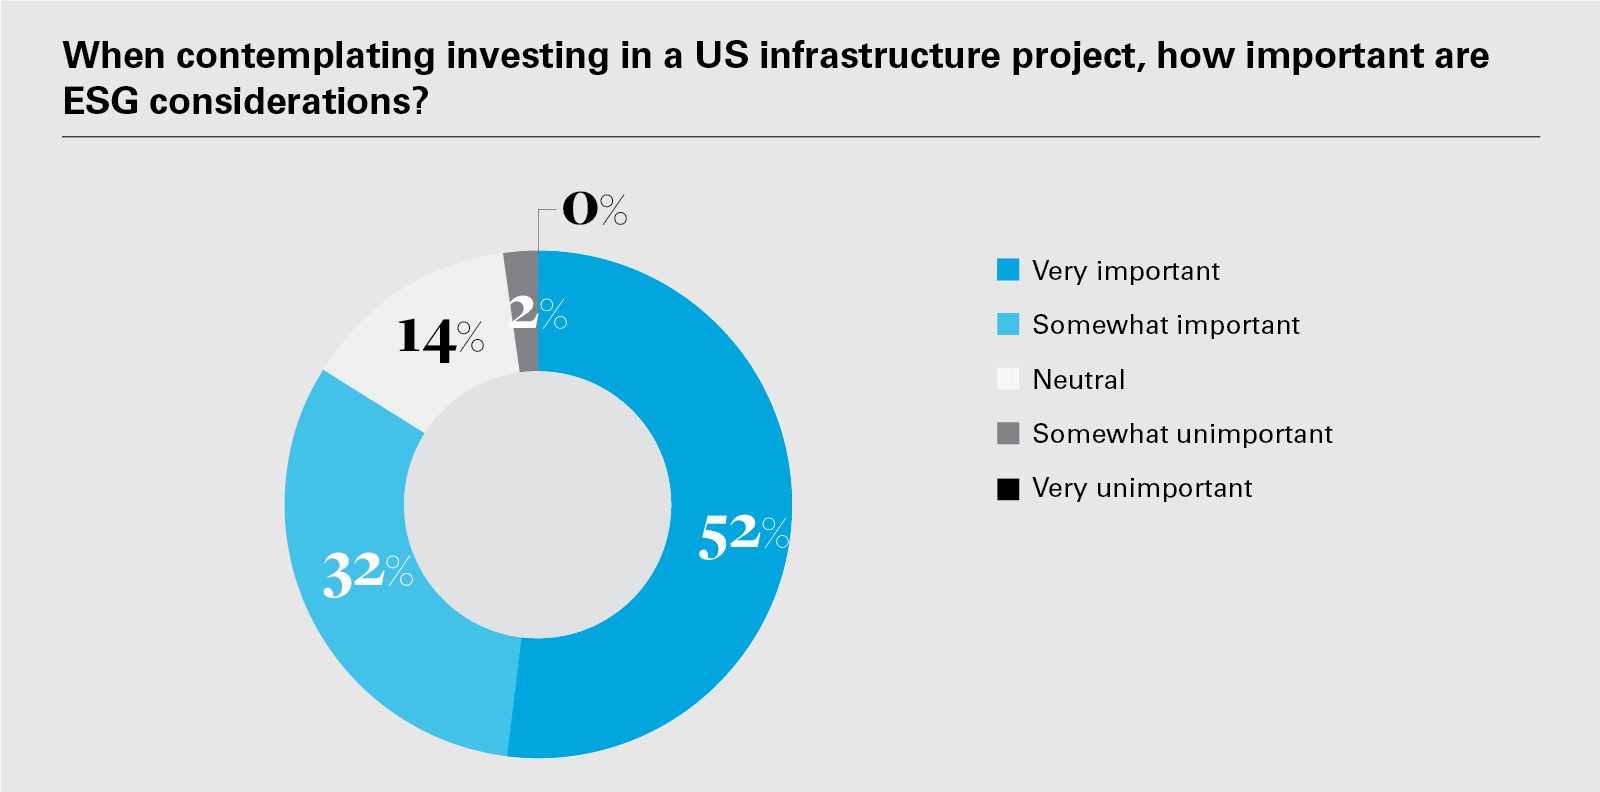 When contemplating investing in a US infrastructure project, how important are ESG considerations?